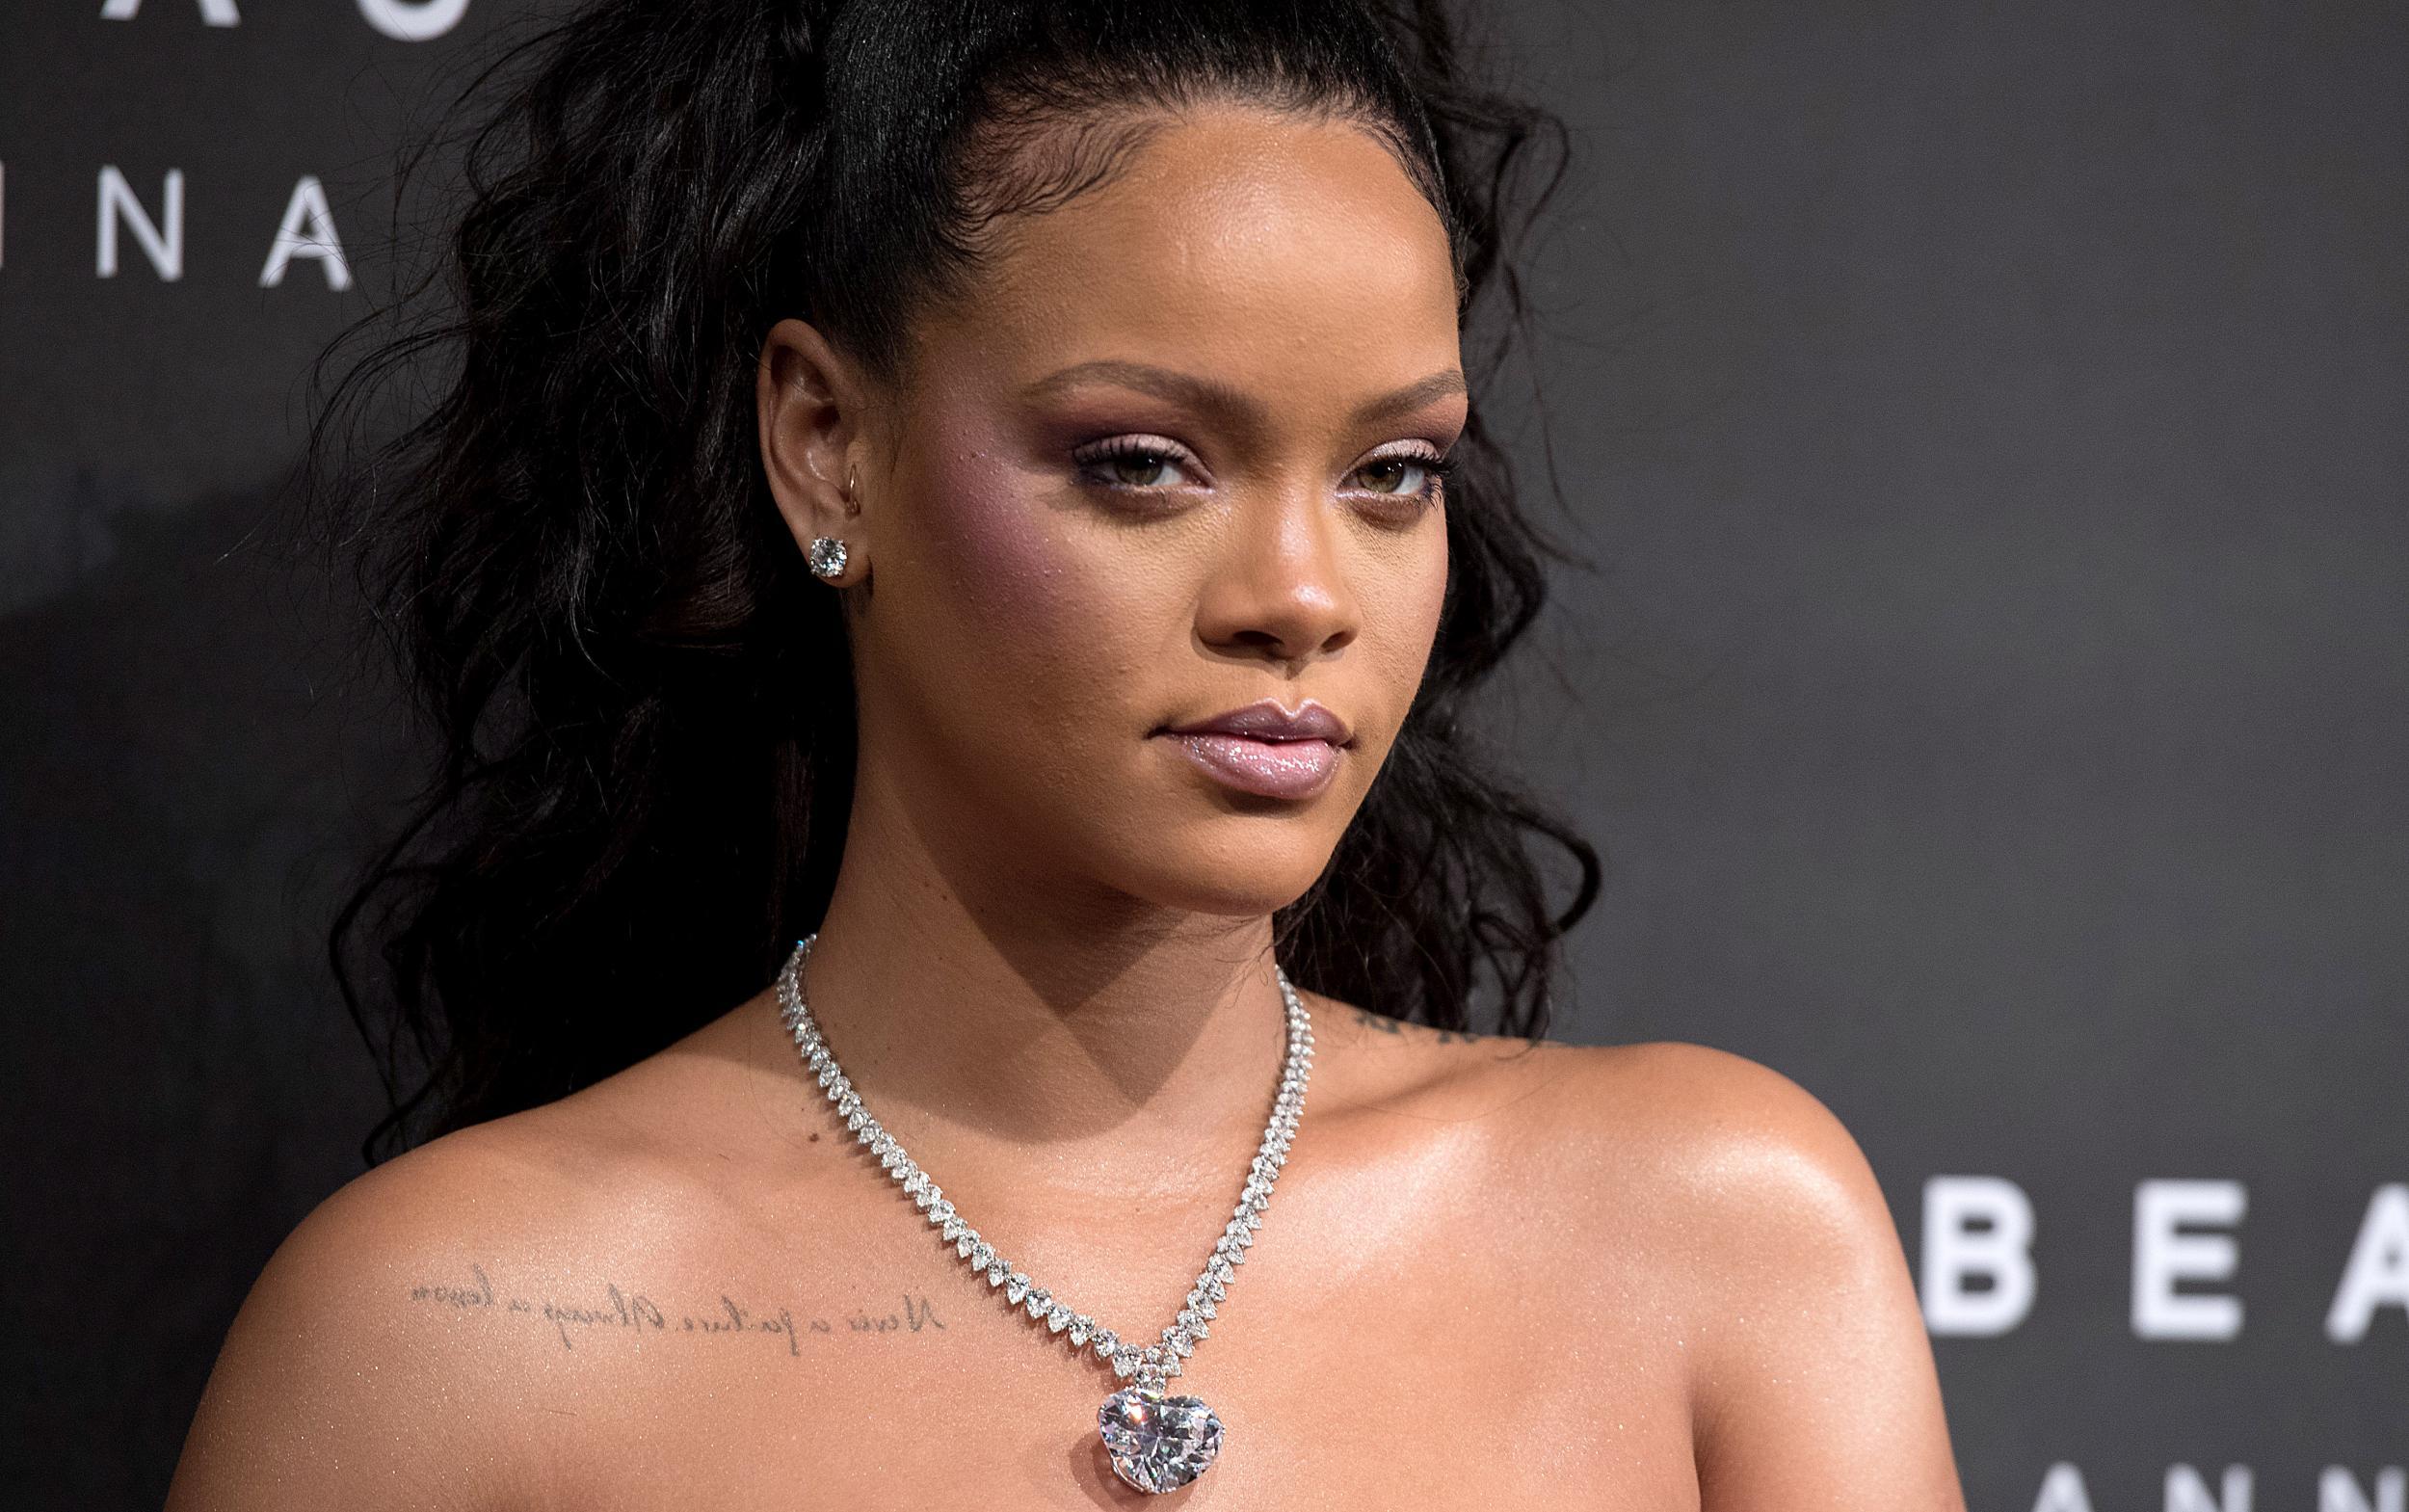 Breaking! Rihanna to Speak at Vogue's Forces of Fashion Conference